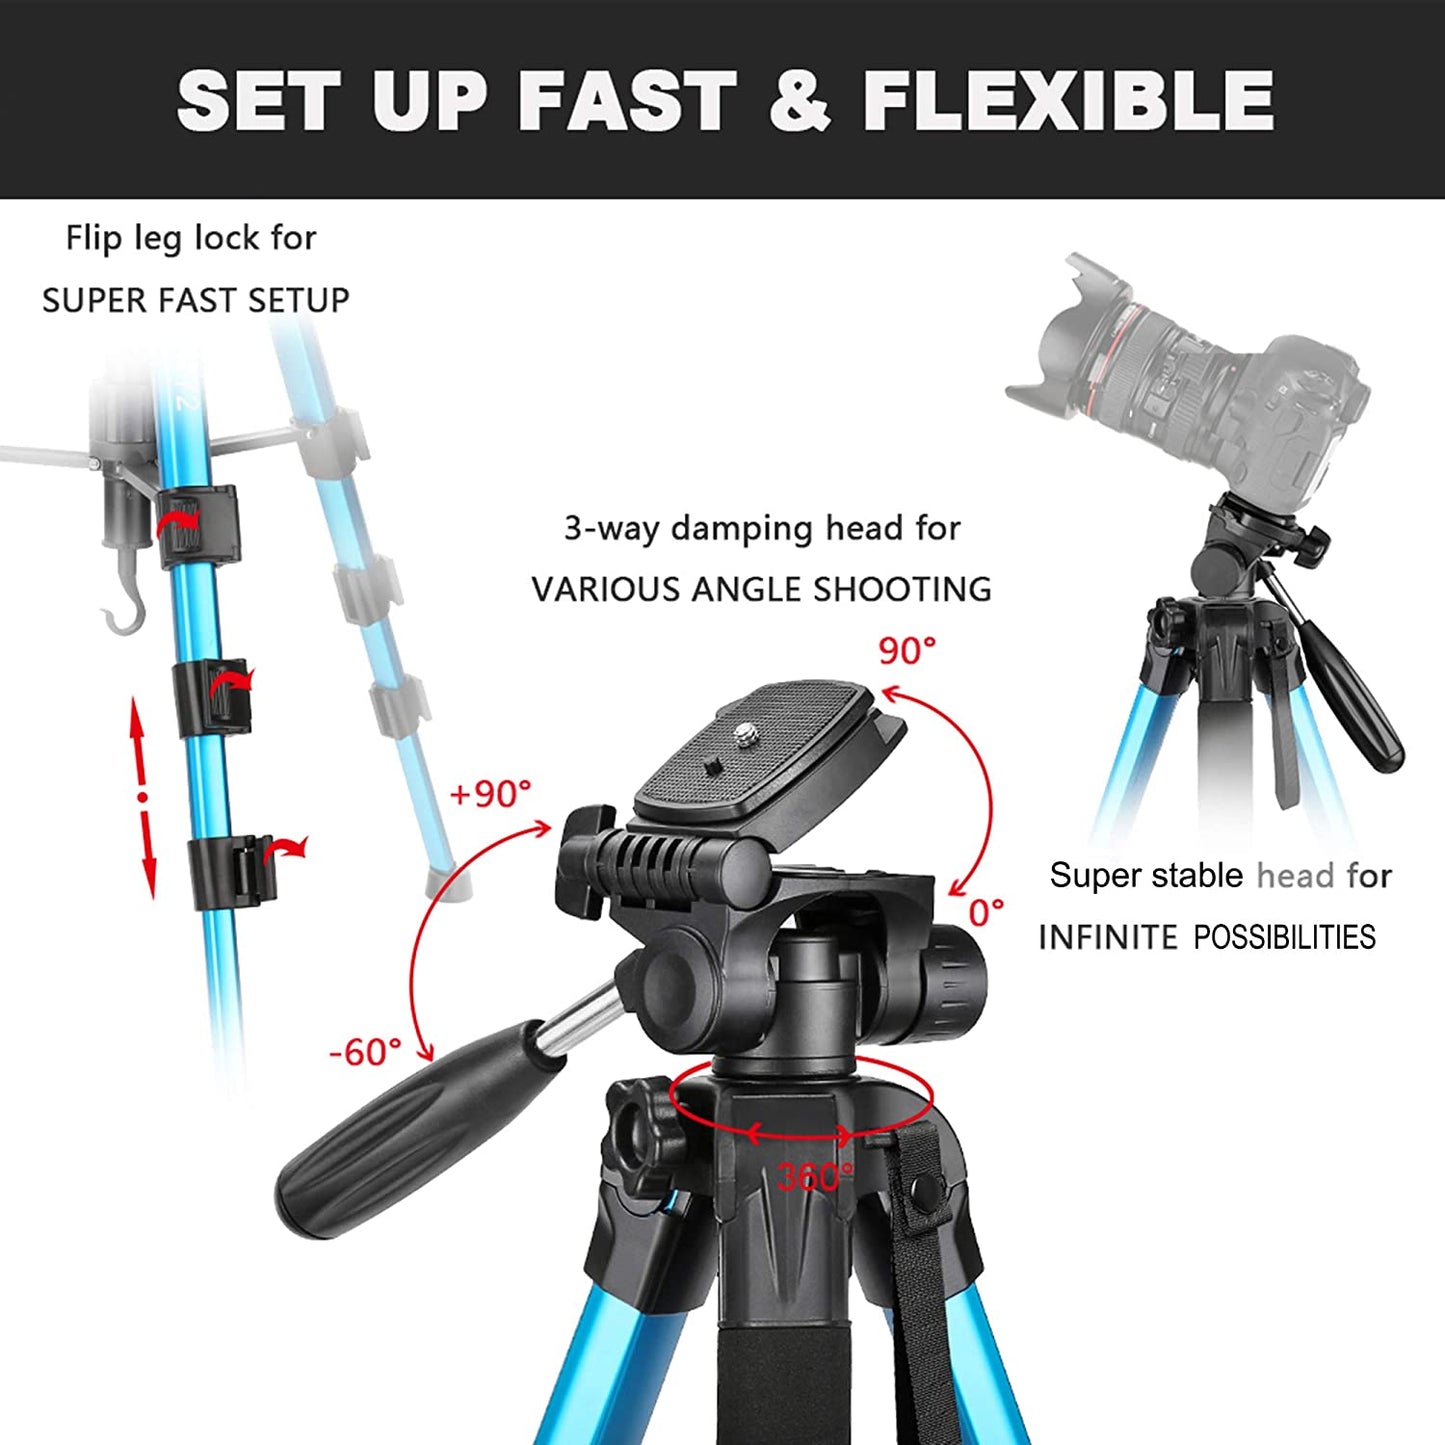 Victiv 72-inch Camera Tripod Aluminum T72 Max Height 182cm- Lightweight Tripod & Monopod Compact for Travel with 3-way Swivel Head and 2 Quick Release Plates for DSLR Video Shooting - Blue